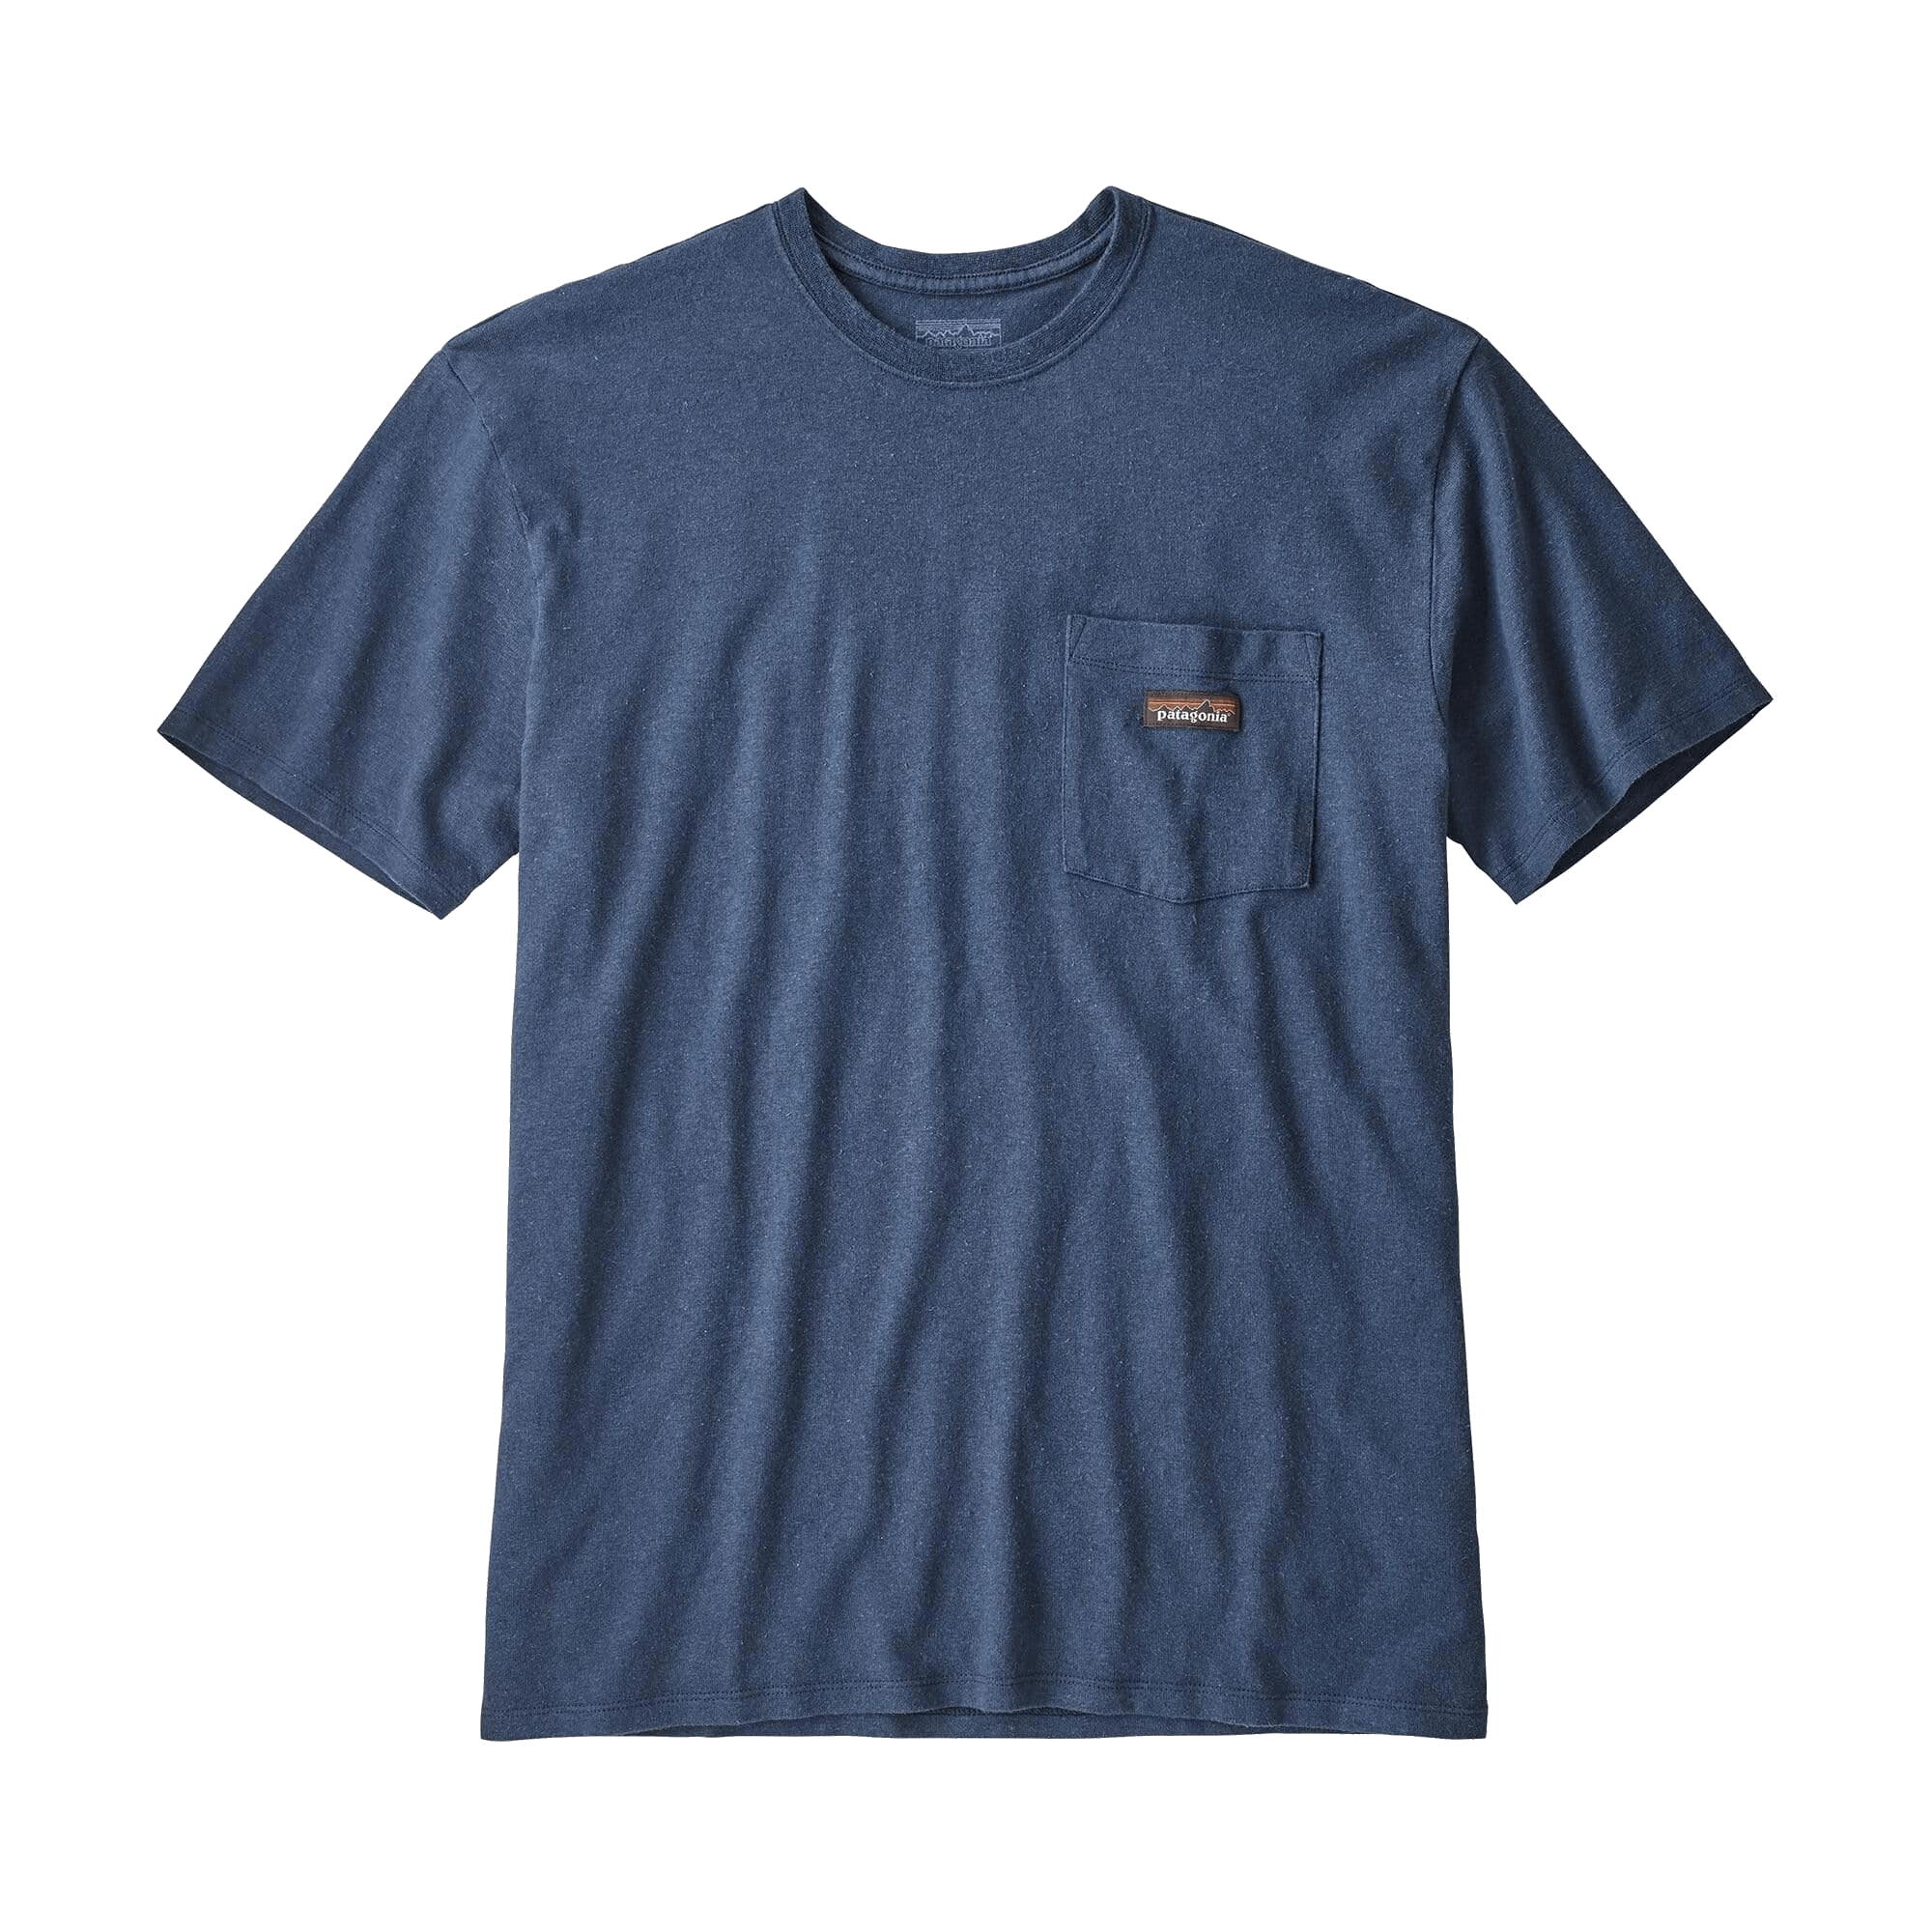 Patagonia mens how to save responsibili-tee - current blue - Rockcity -  Men's Clothing, Men's Shirts & Tops